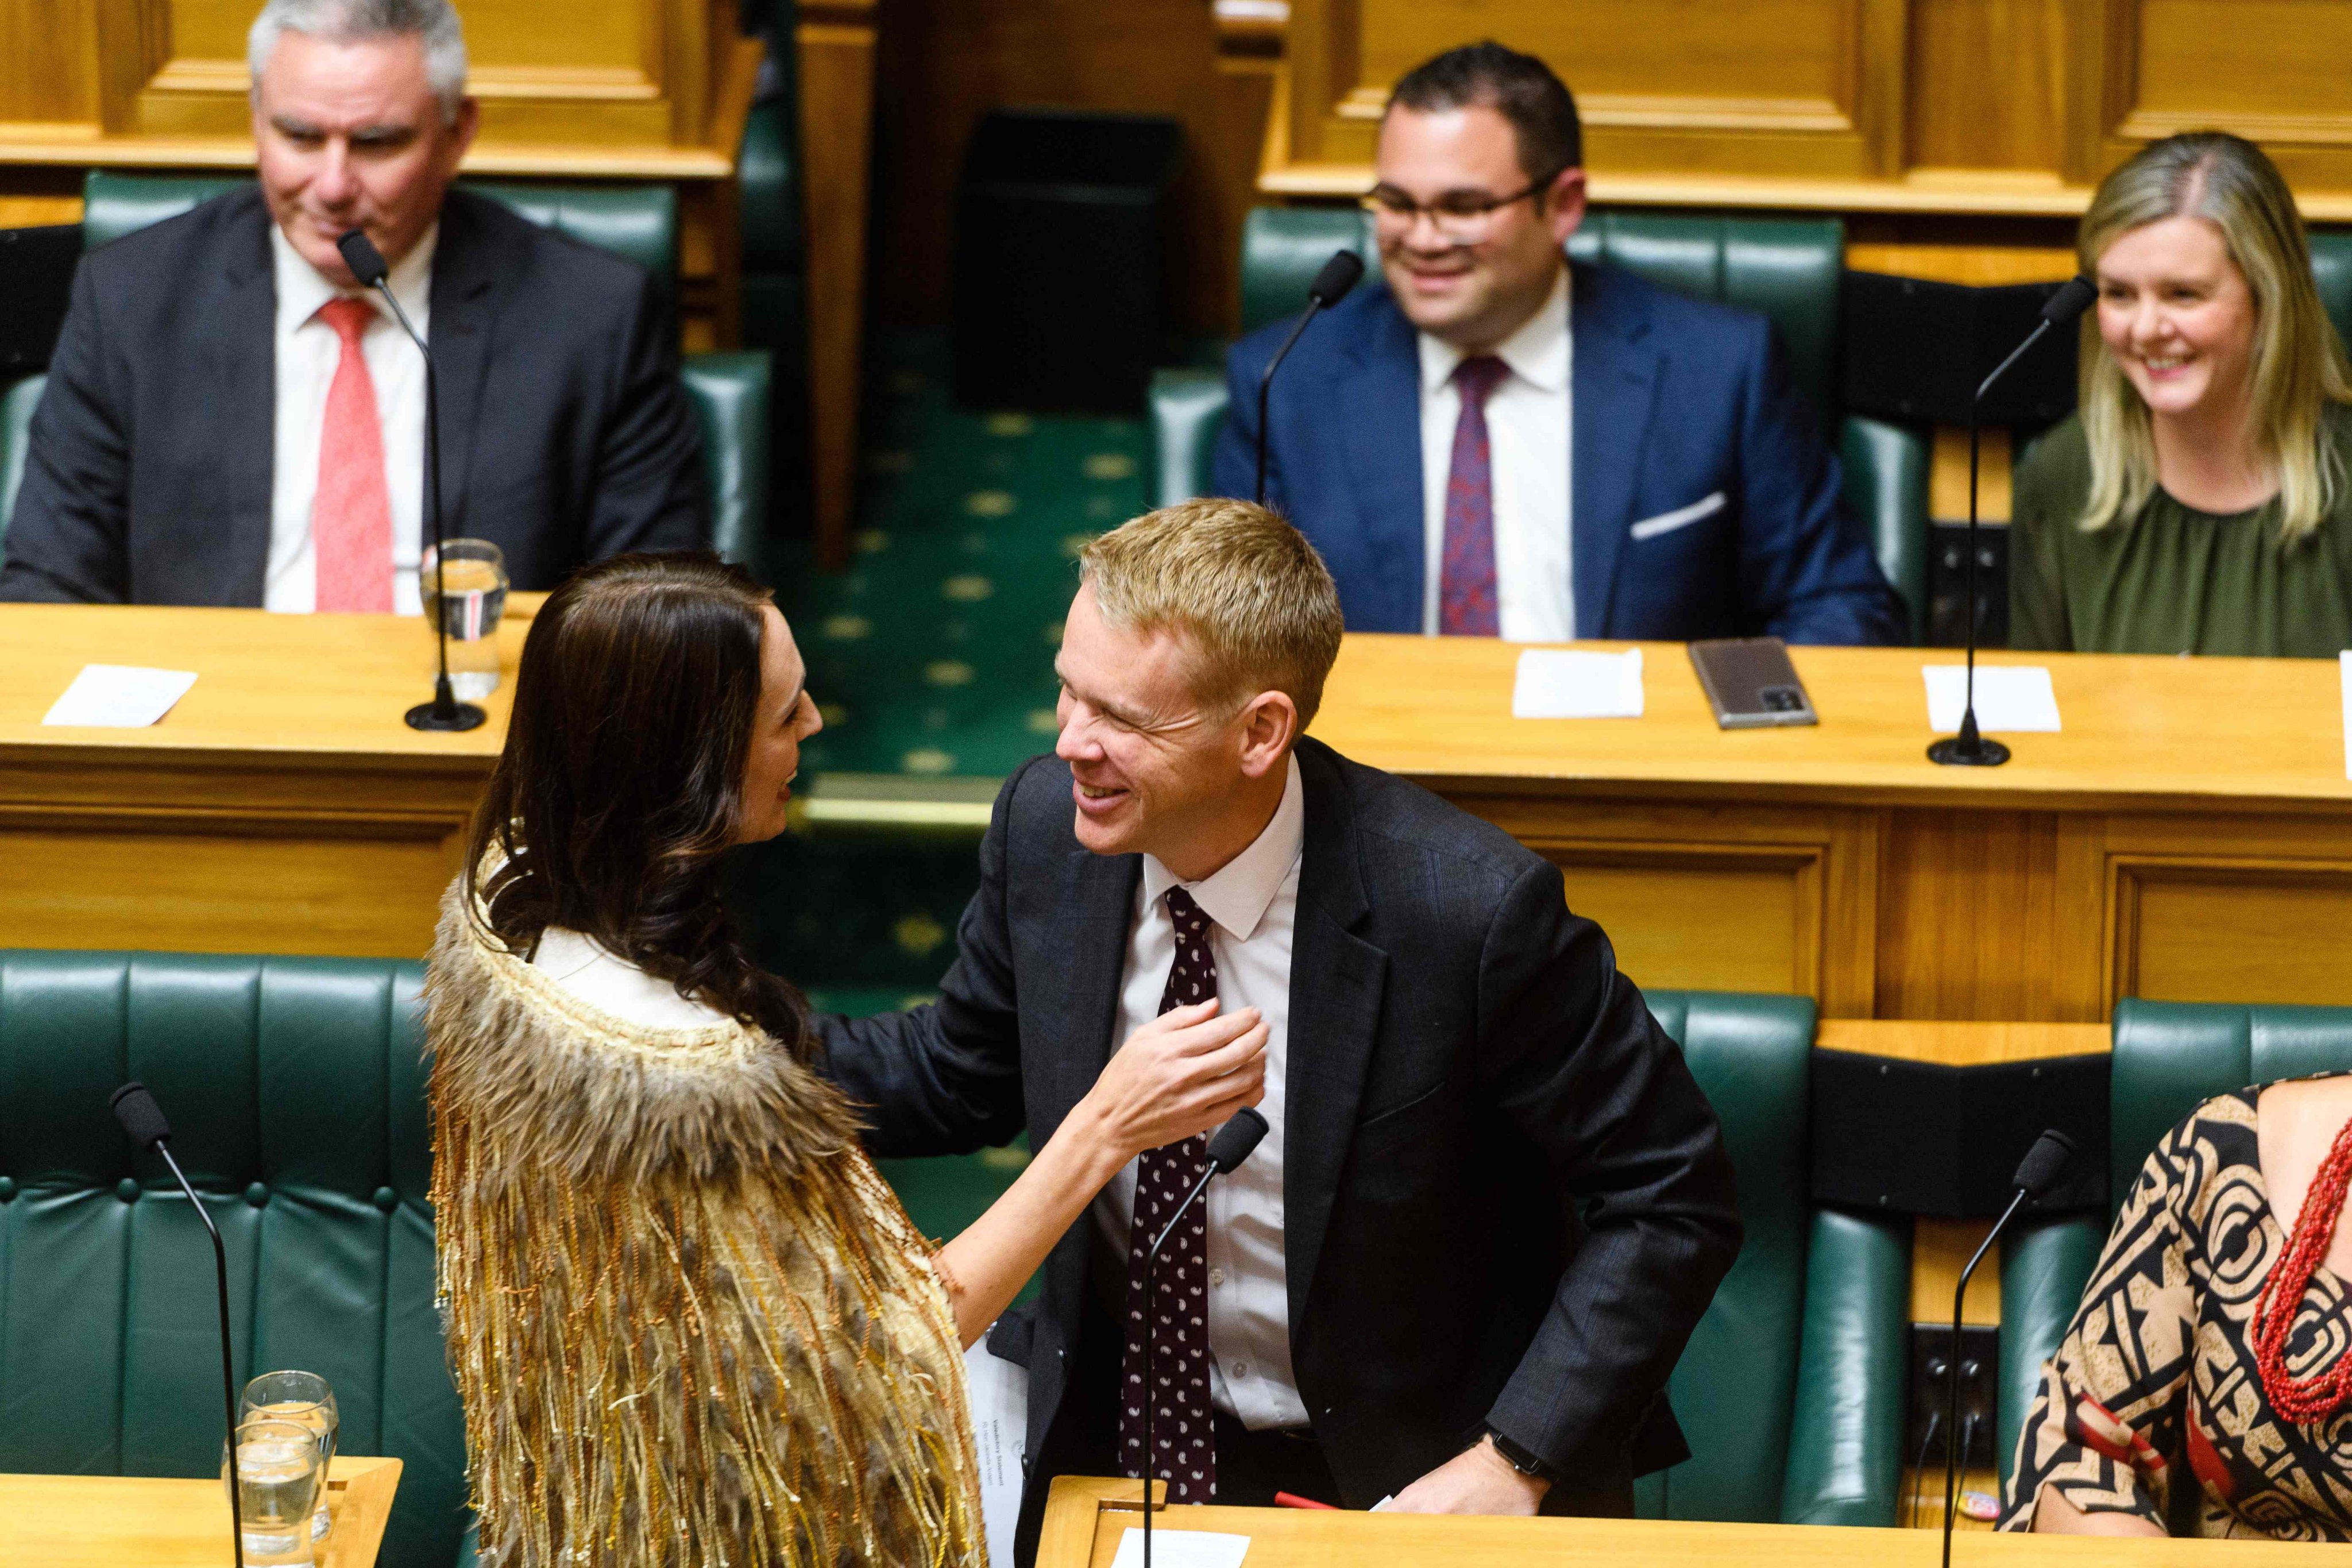 Outgoing New Zealand prime minister Jacinda Ardern (left) with her successor Chris Hipkins during her valedictory speech in parliament in Wellington on April 5. Photo: AFP